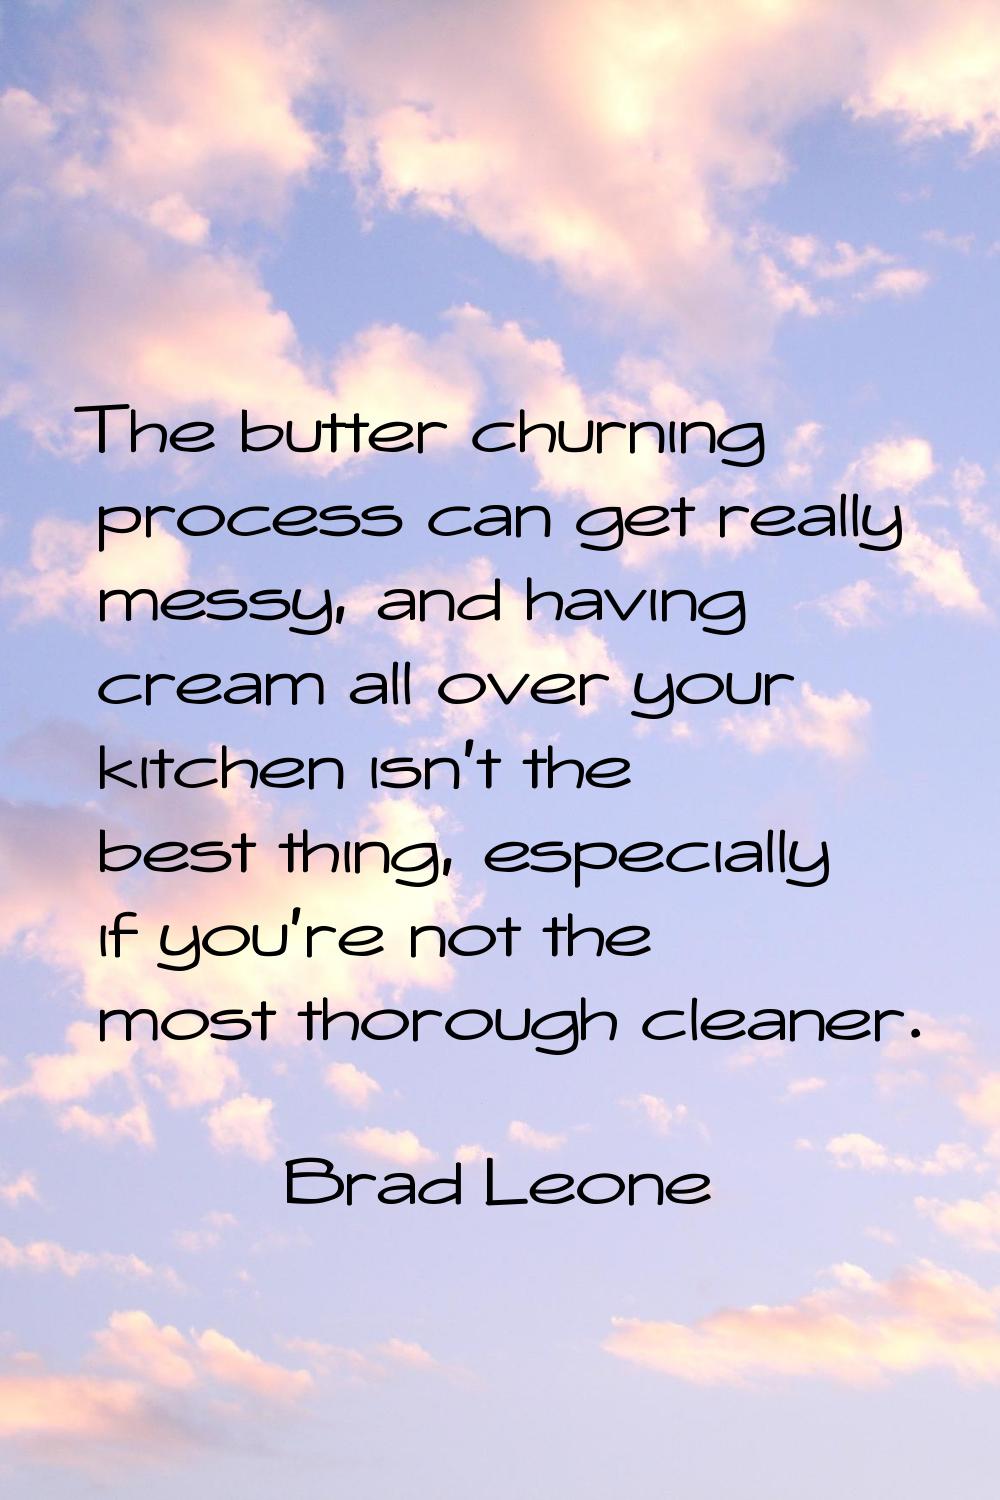 The butter churning process can get really messy, and having cream all over your kitchen isn't the 